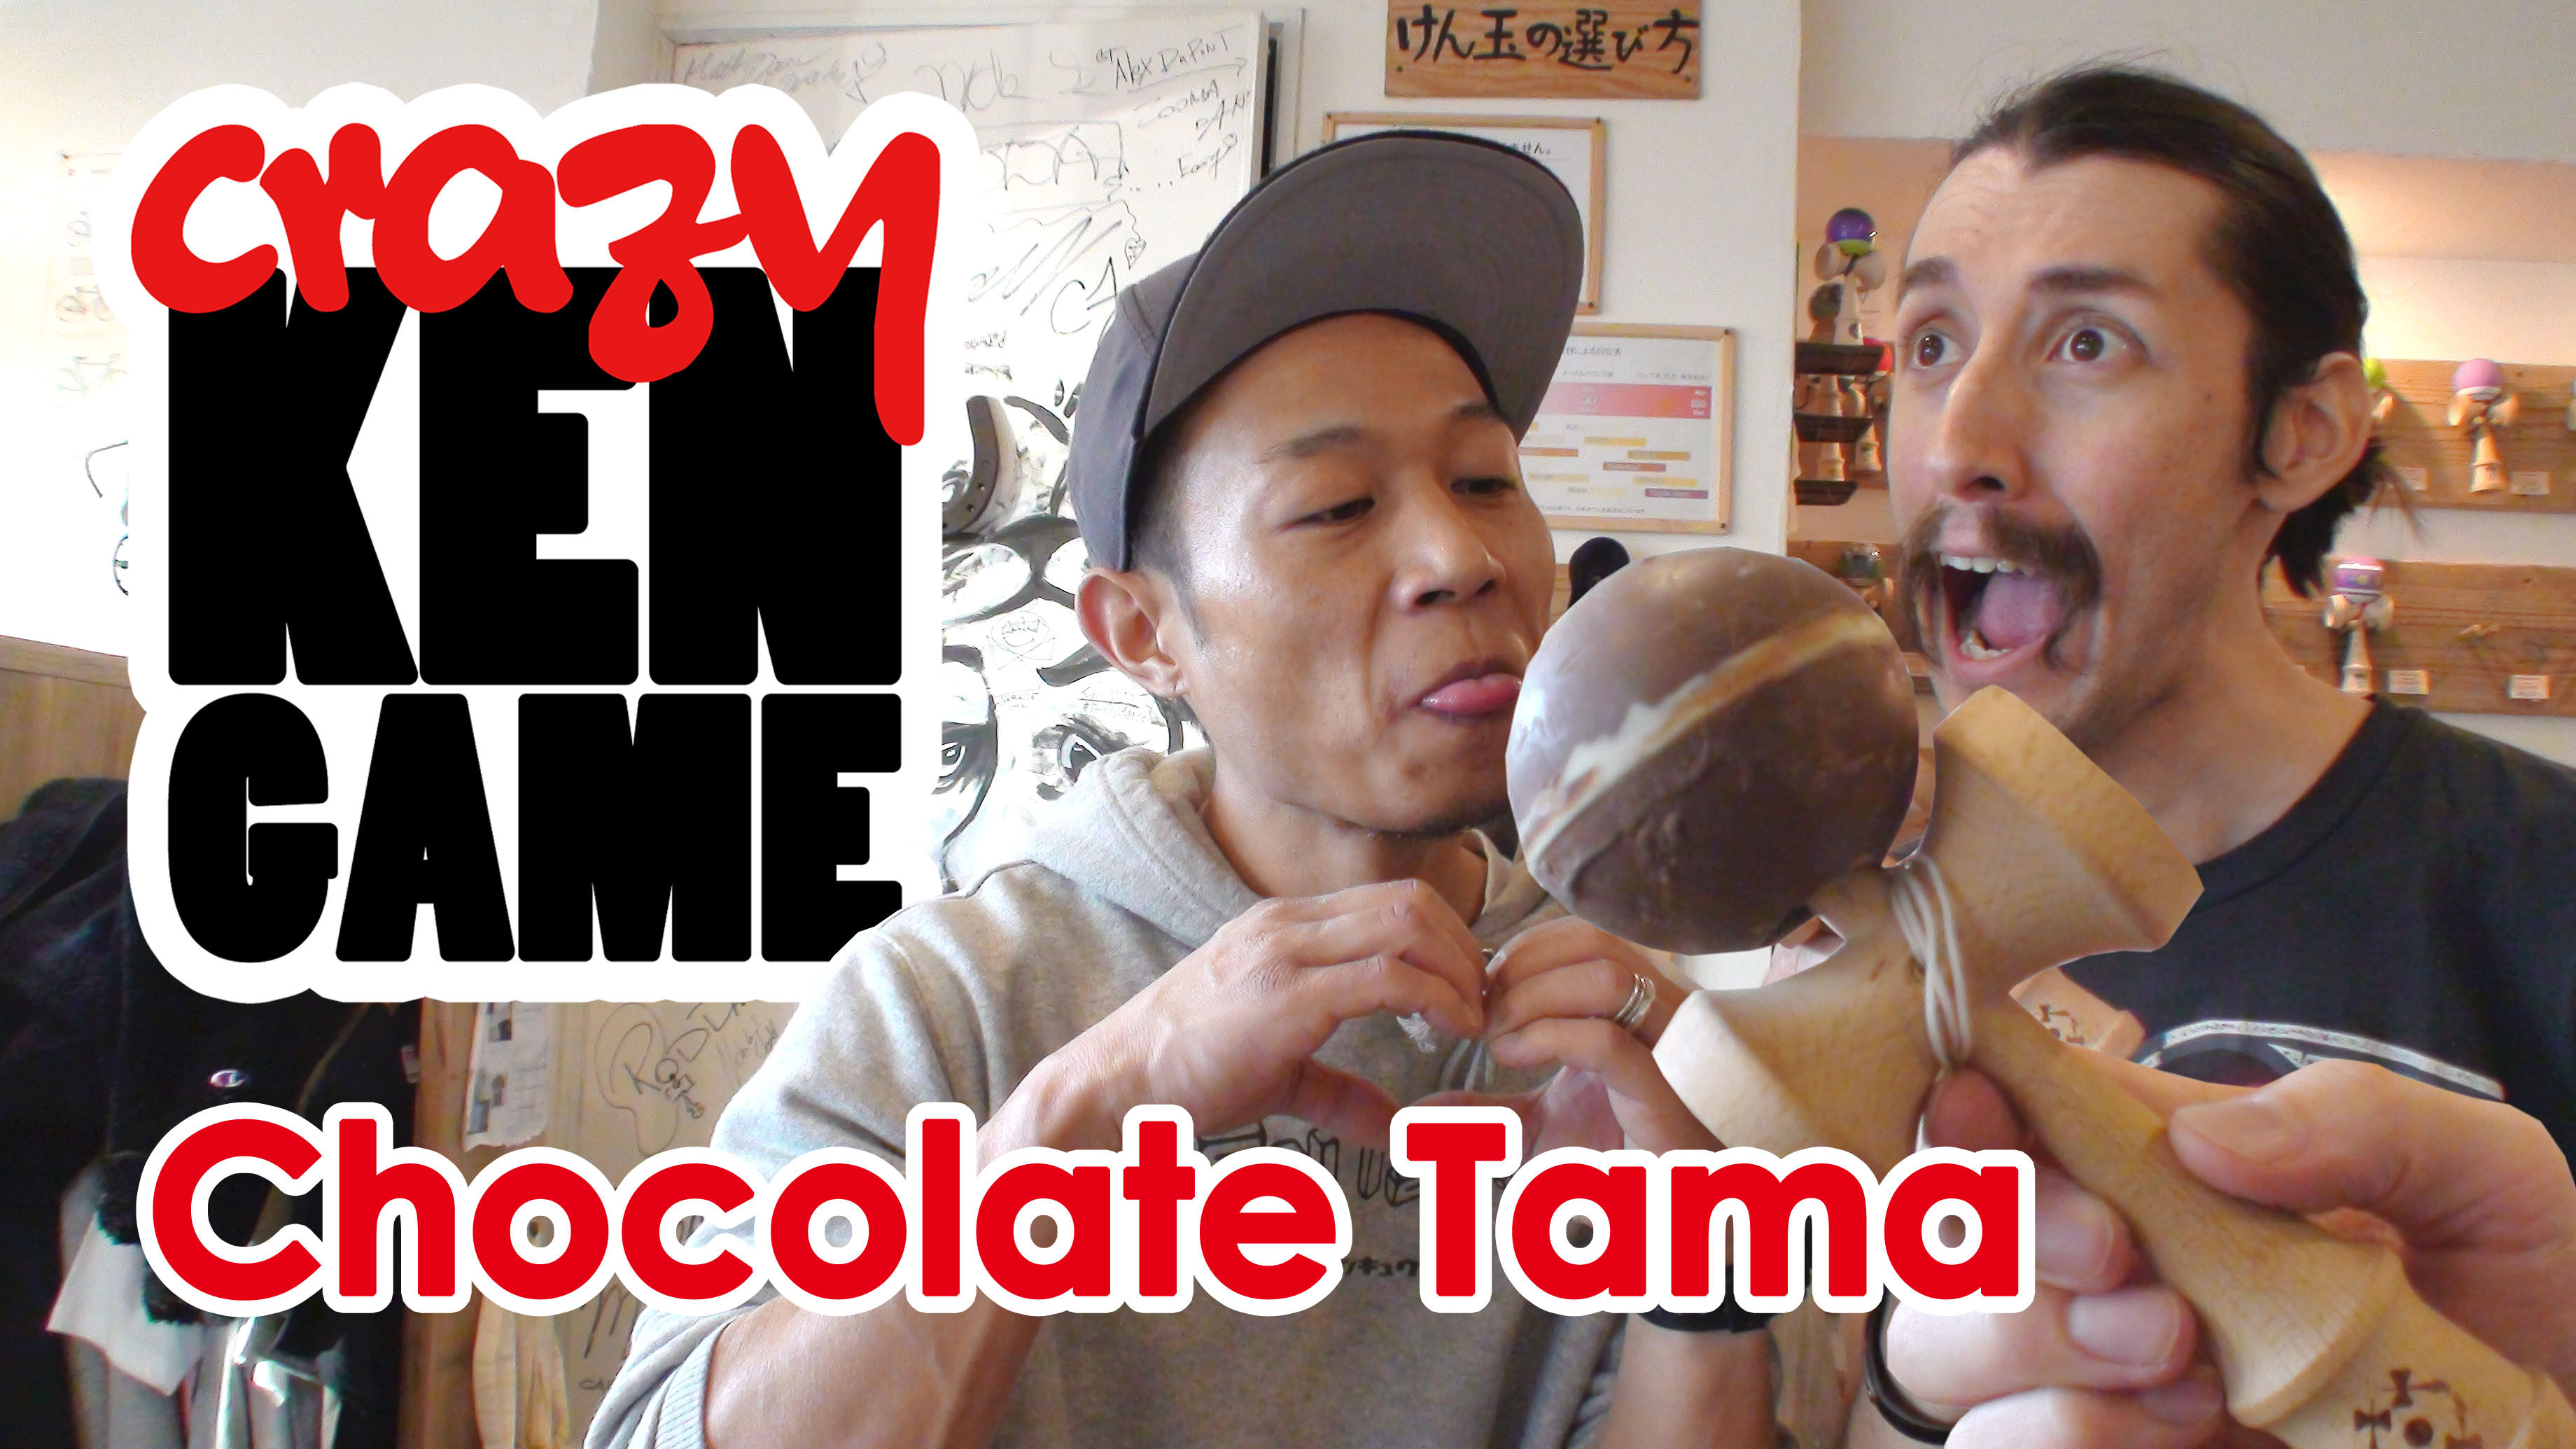 The worlds first playable chocolate tama.